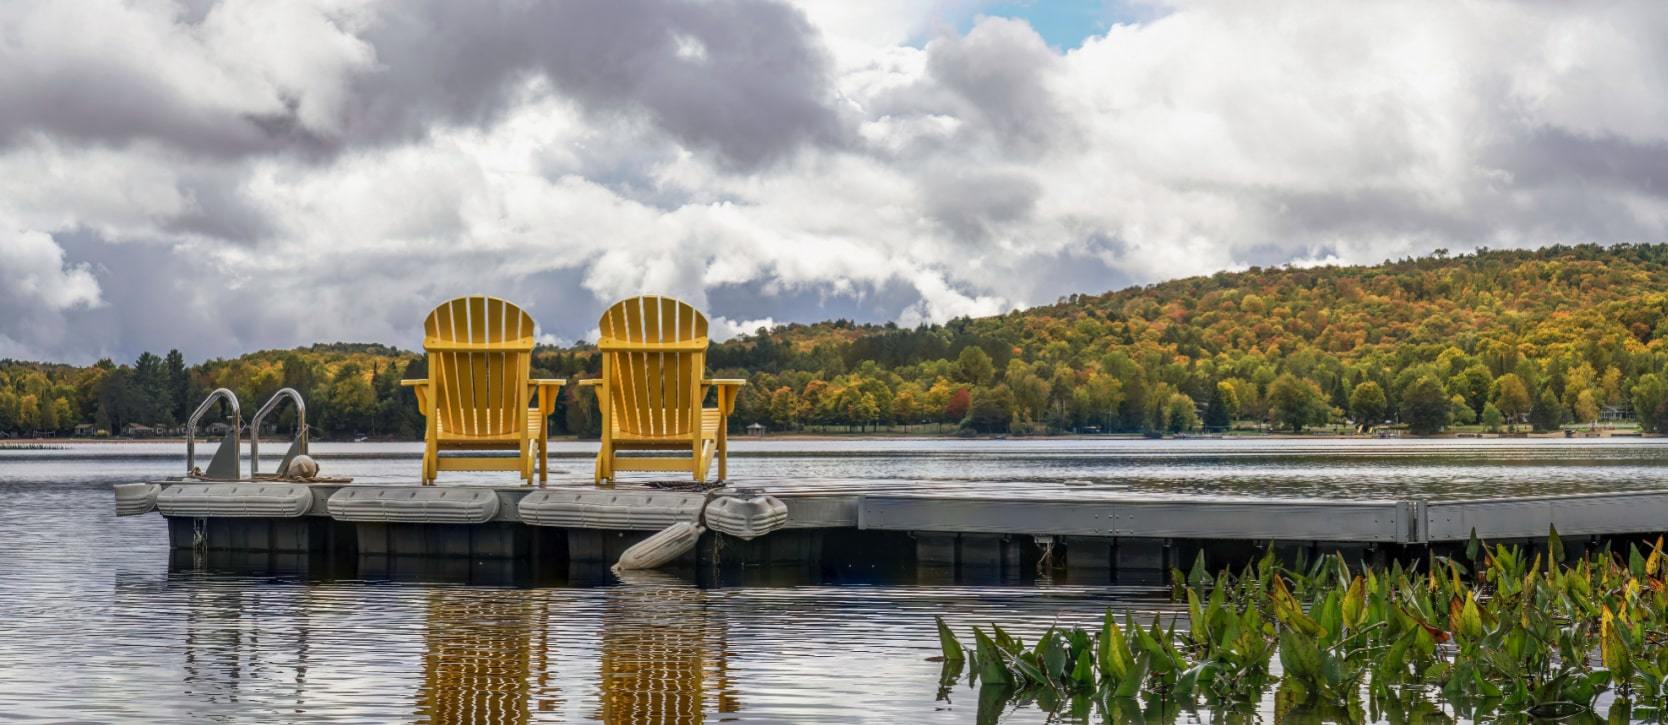 Chairs on a dock in front of the water in the Algonquin Highlands, Haliburton